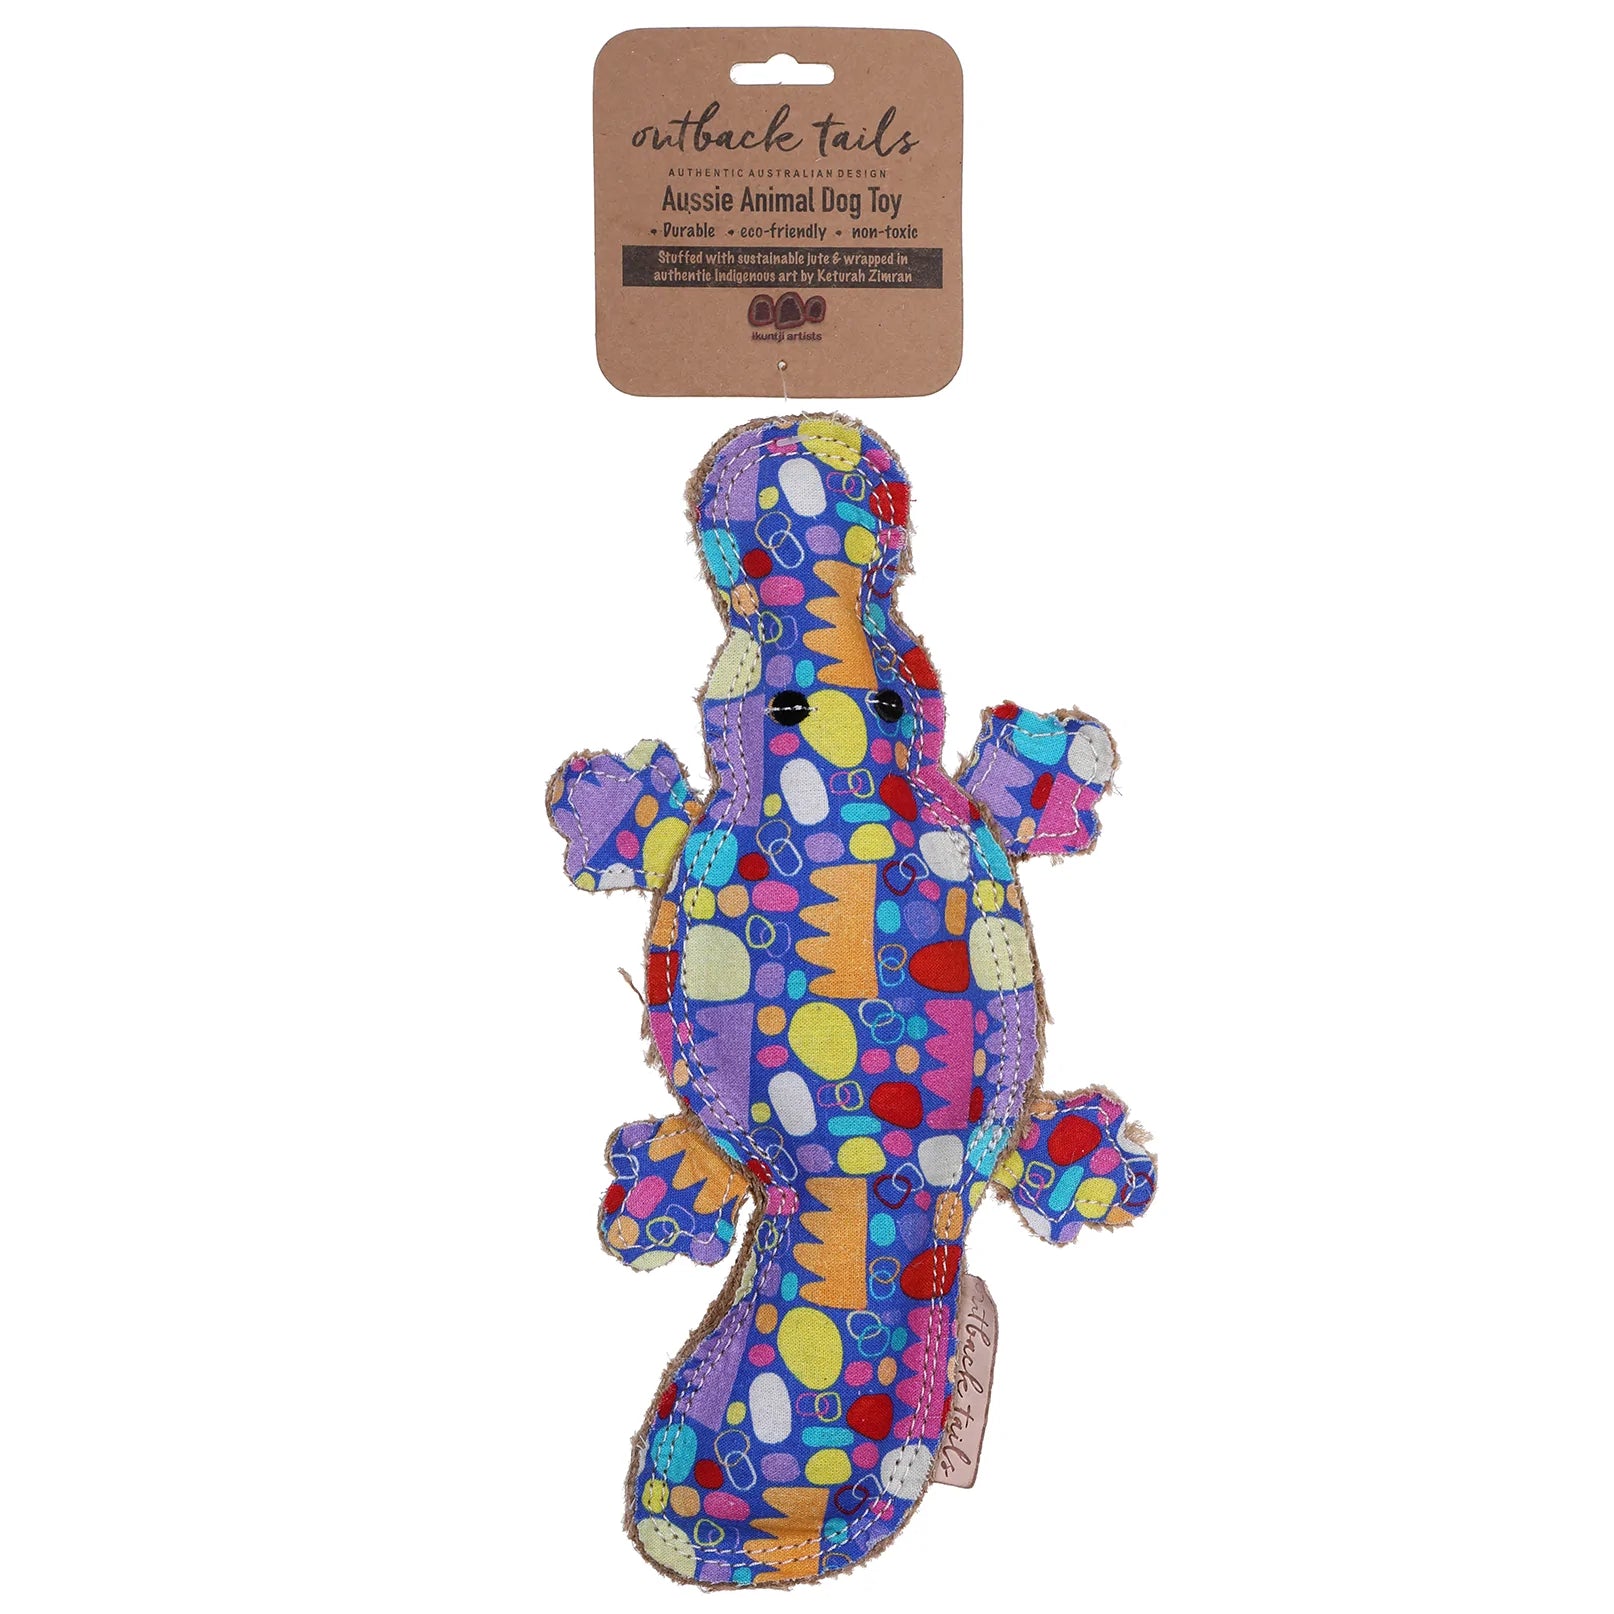 Outback Tails Keturah Ziman Dog Toy - Percy Platypus